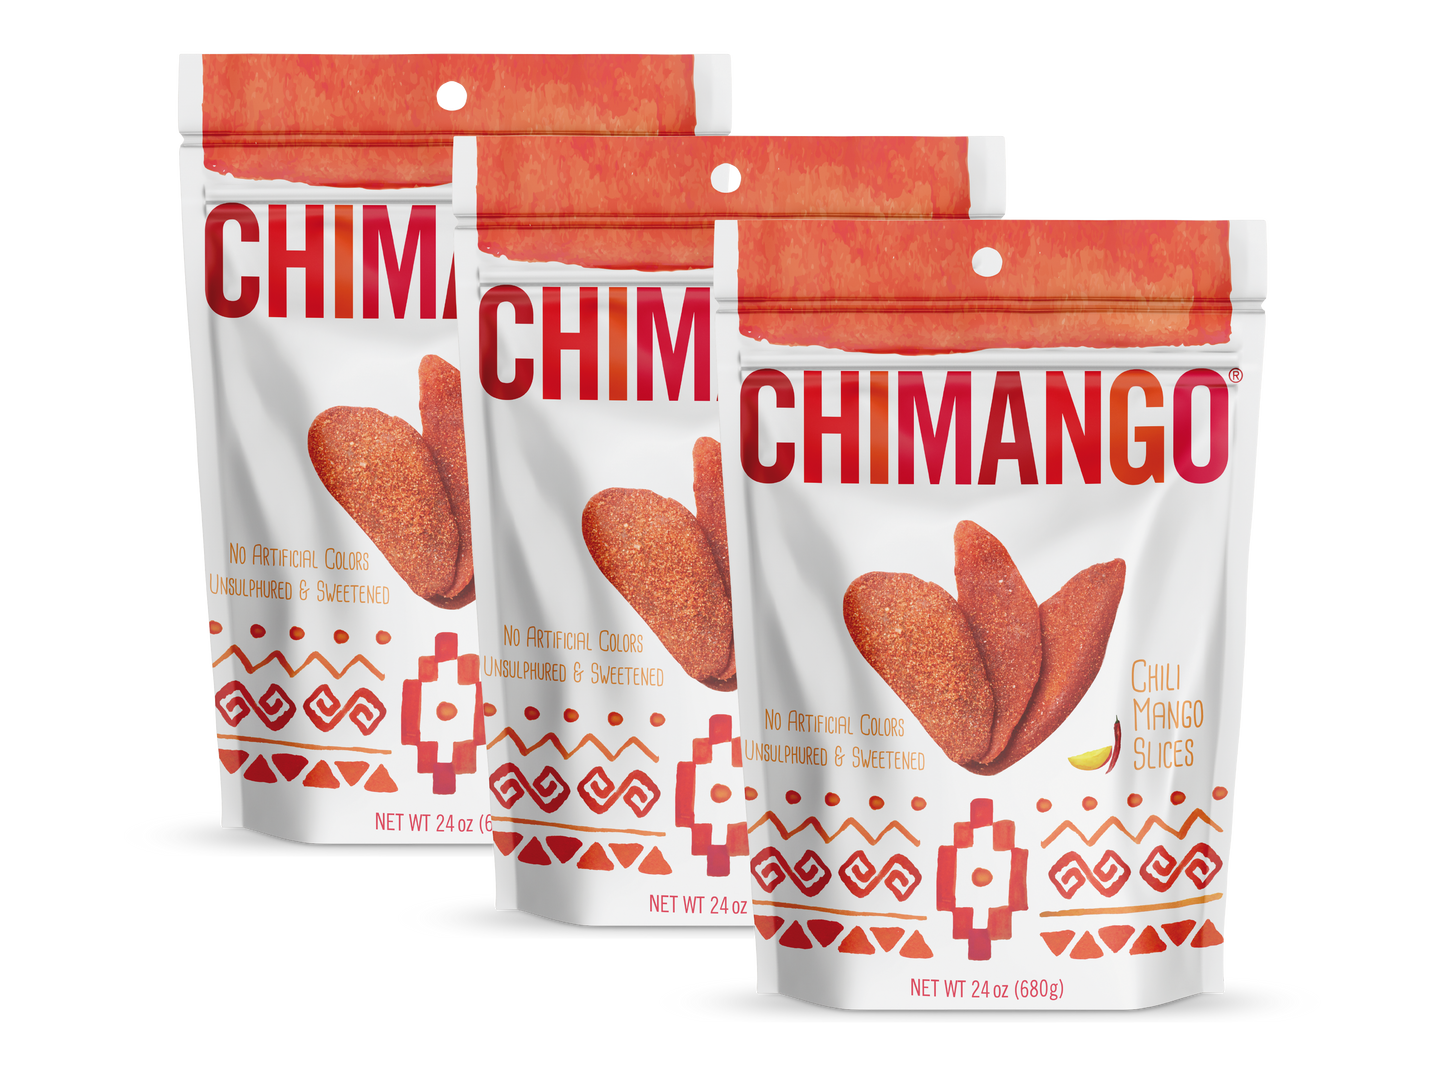 Chili Mango Slices - (3 pack of 24 oz bags) SAVE 20%